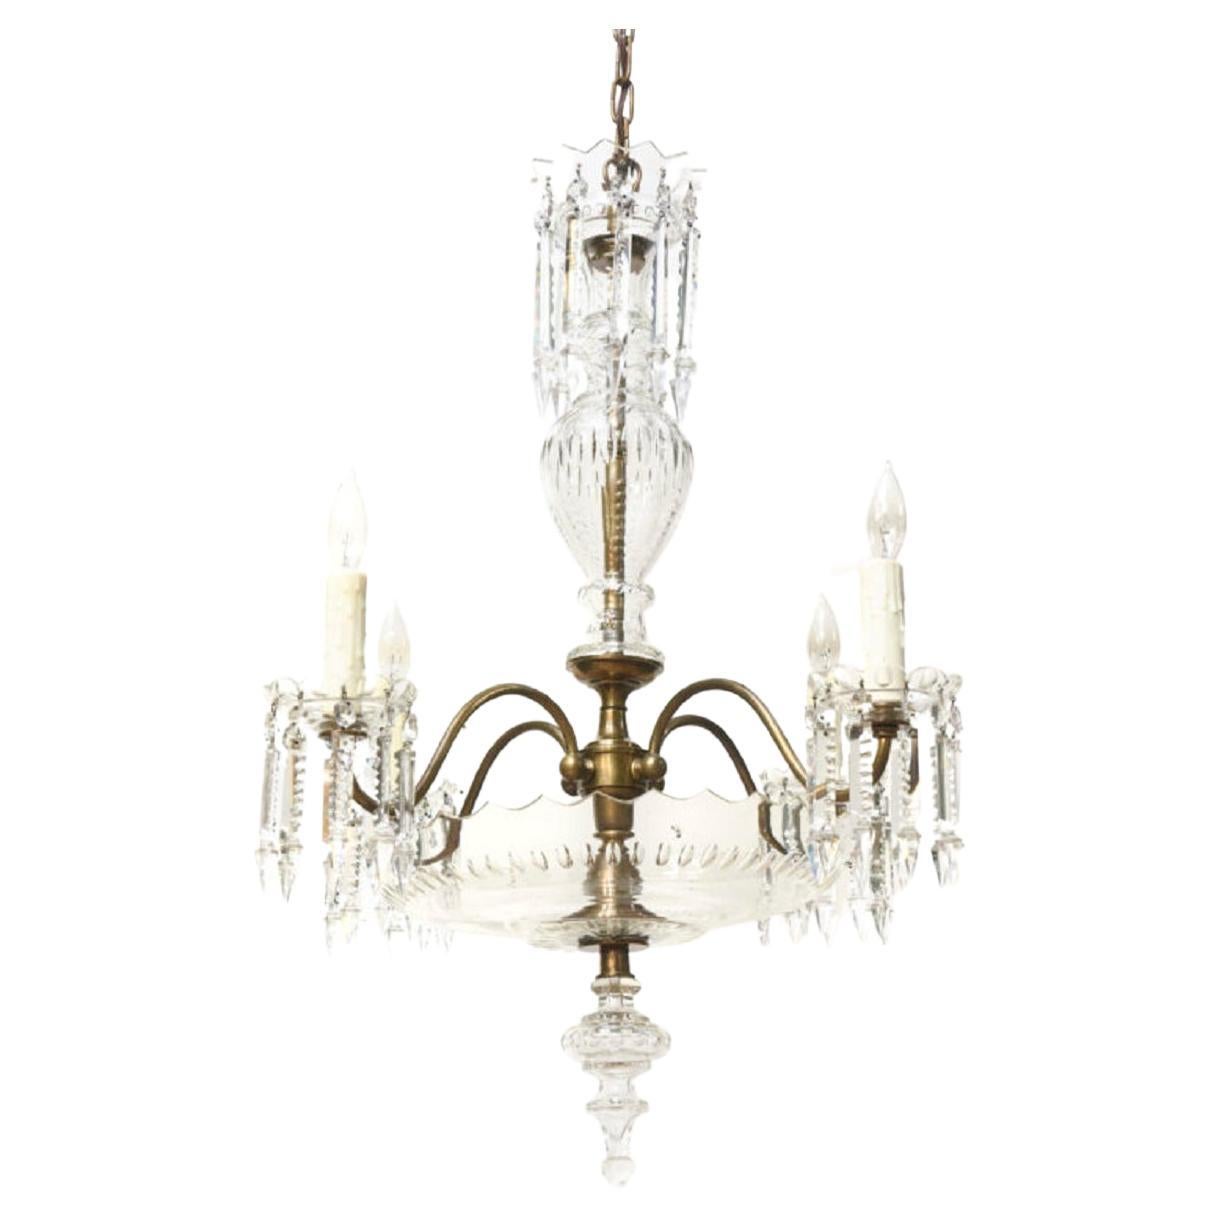 What is a Bohemian chandelier?